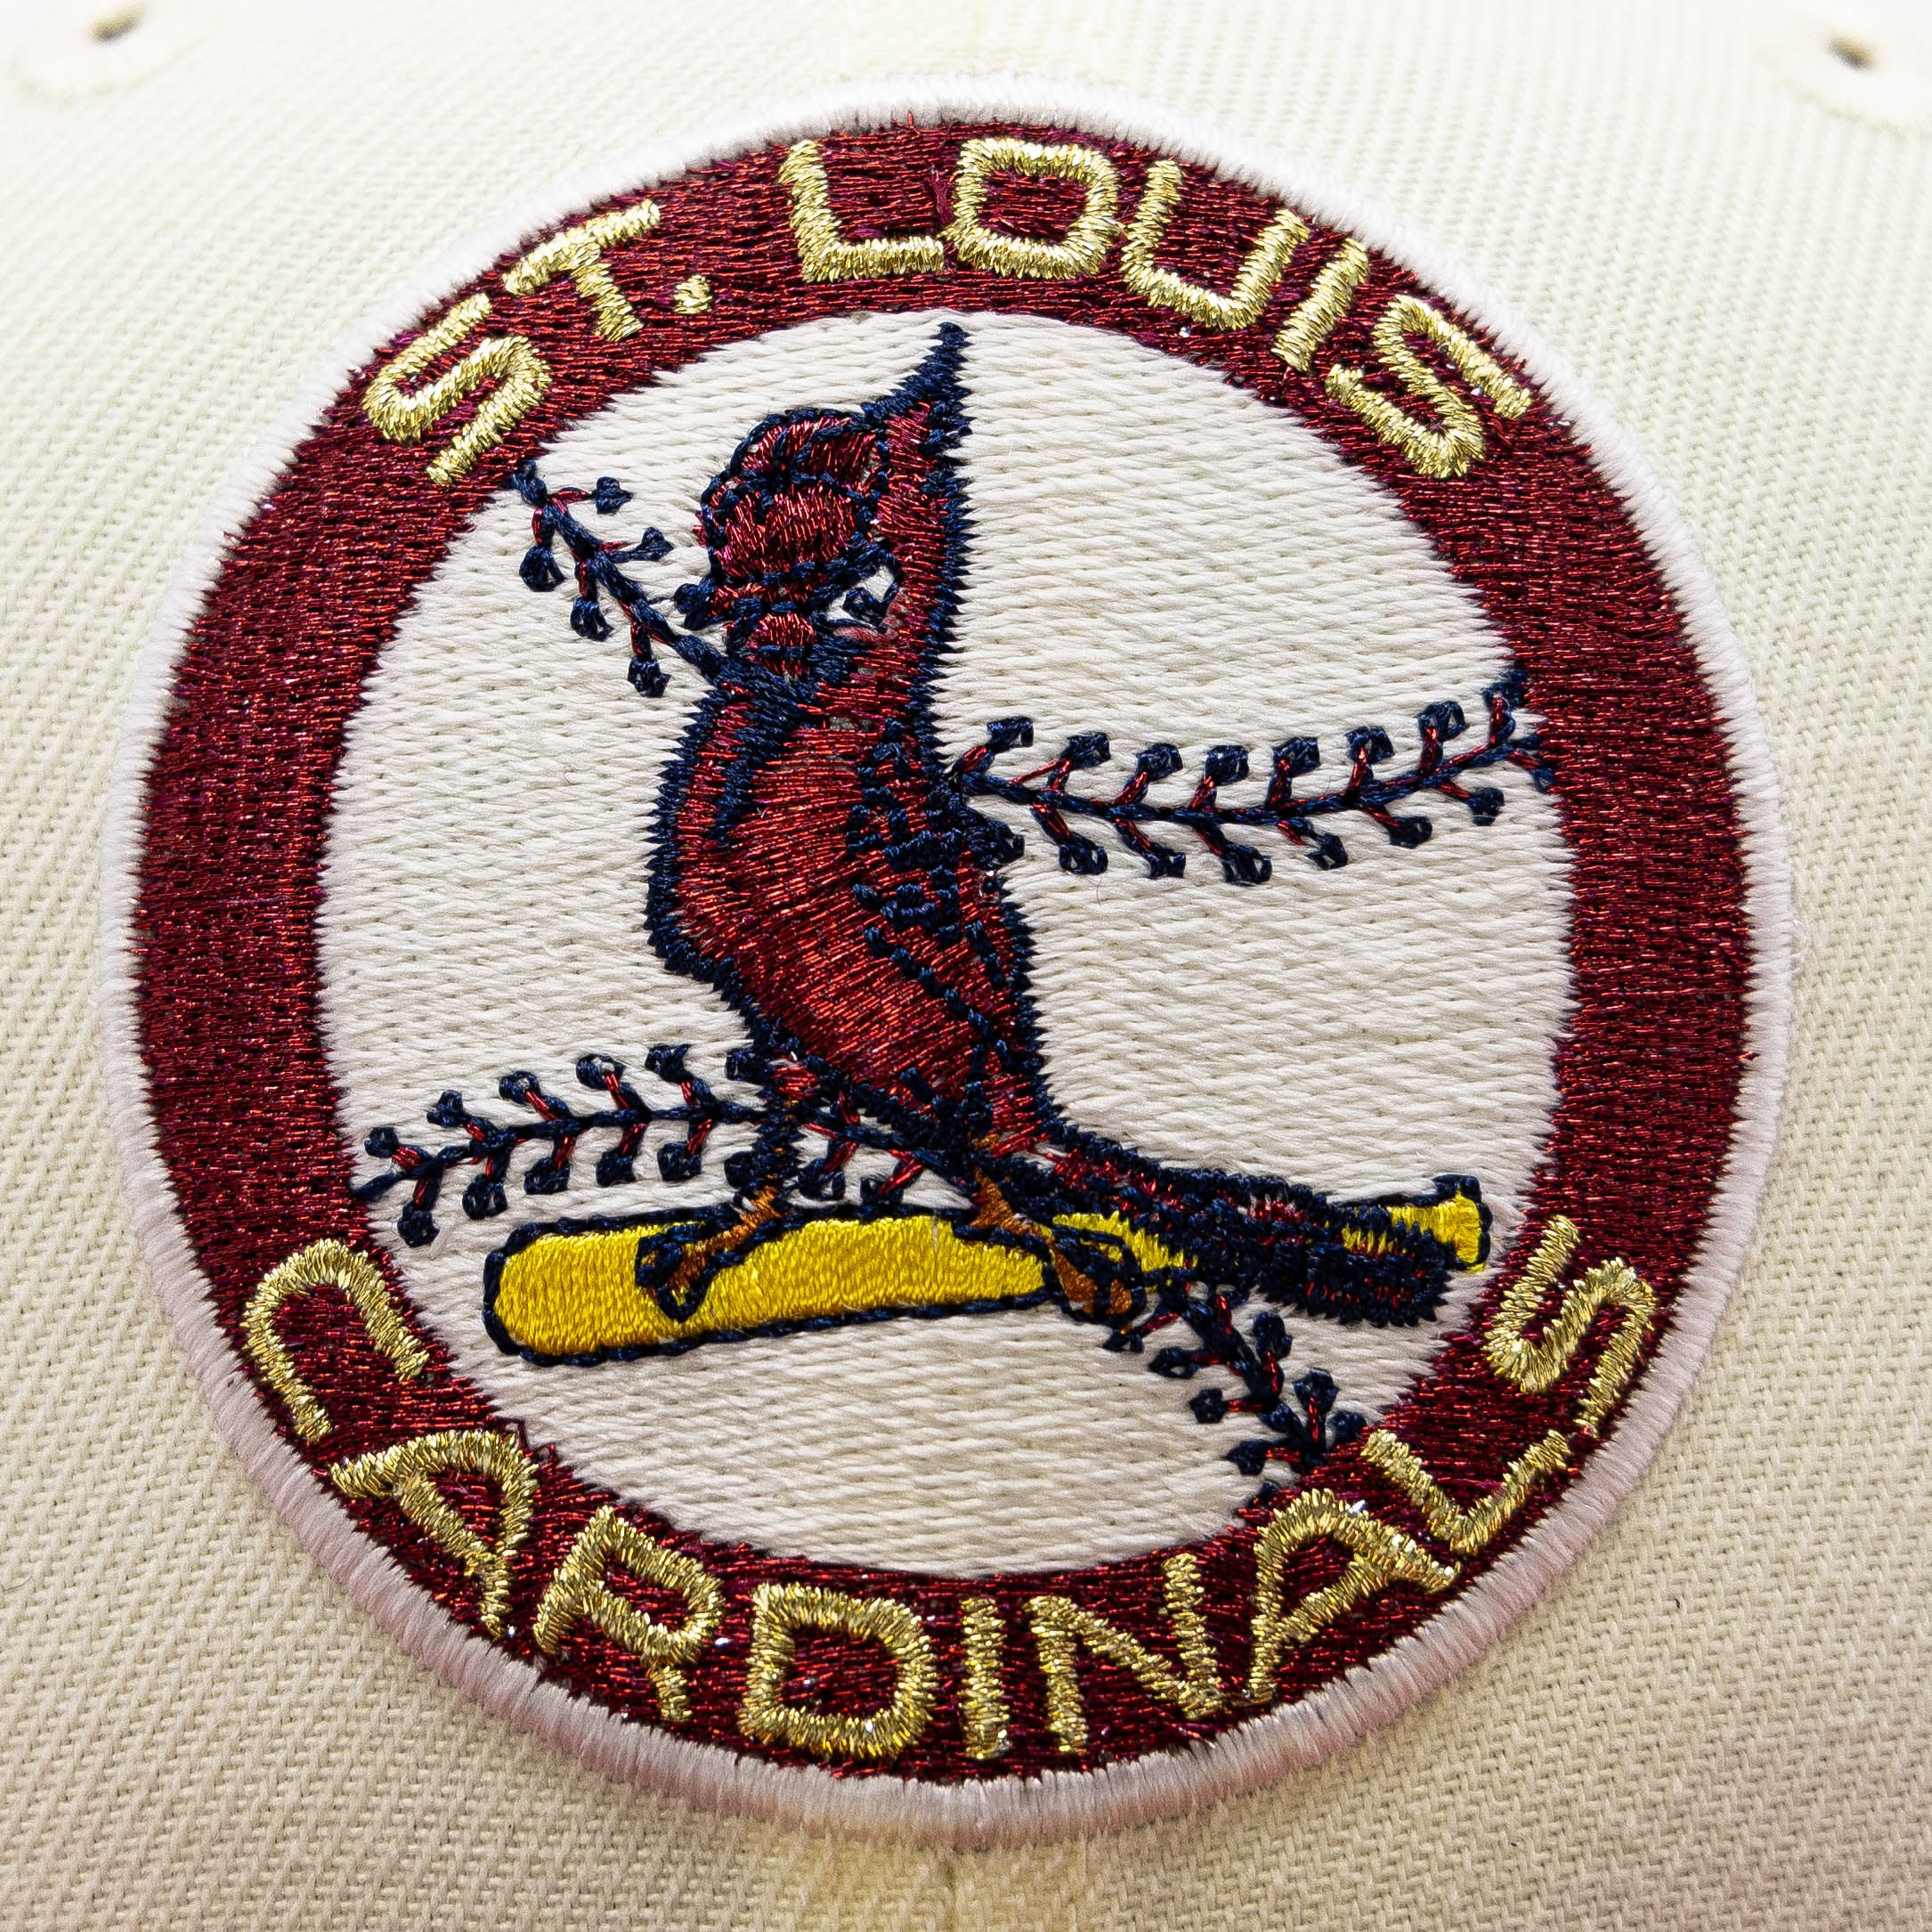 New Era St. Louis Cardinals 30th Anniversary Patch Fitted